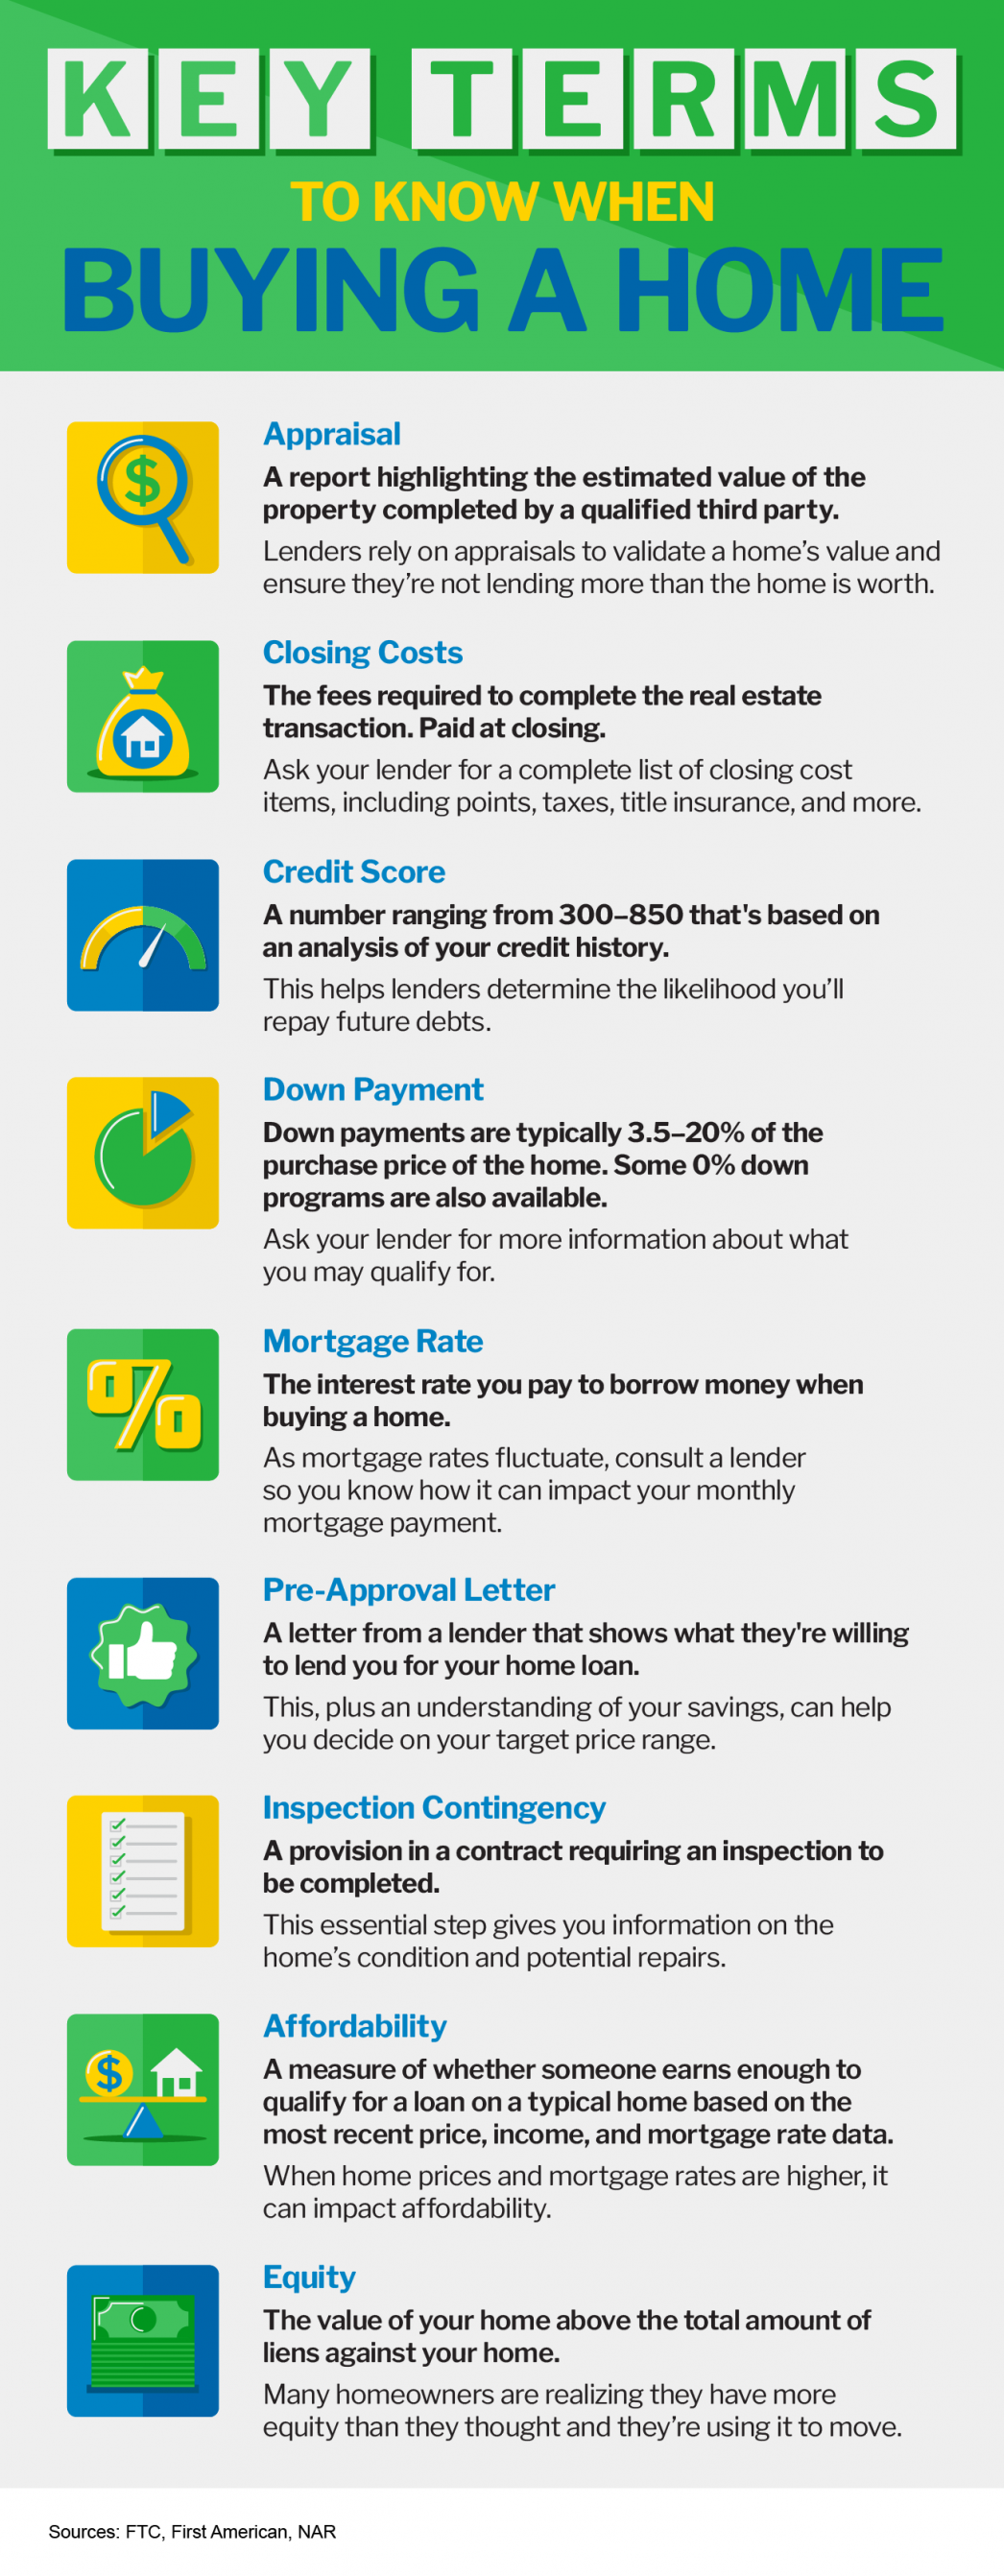 Key Terms To Know When Buying a Home [INFOGRAPHIC] | MyKCM